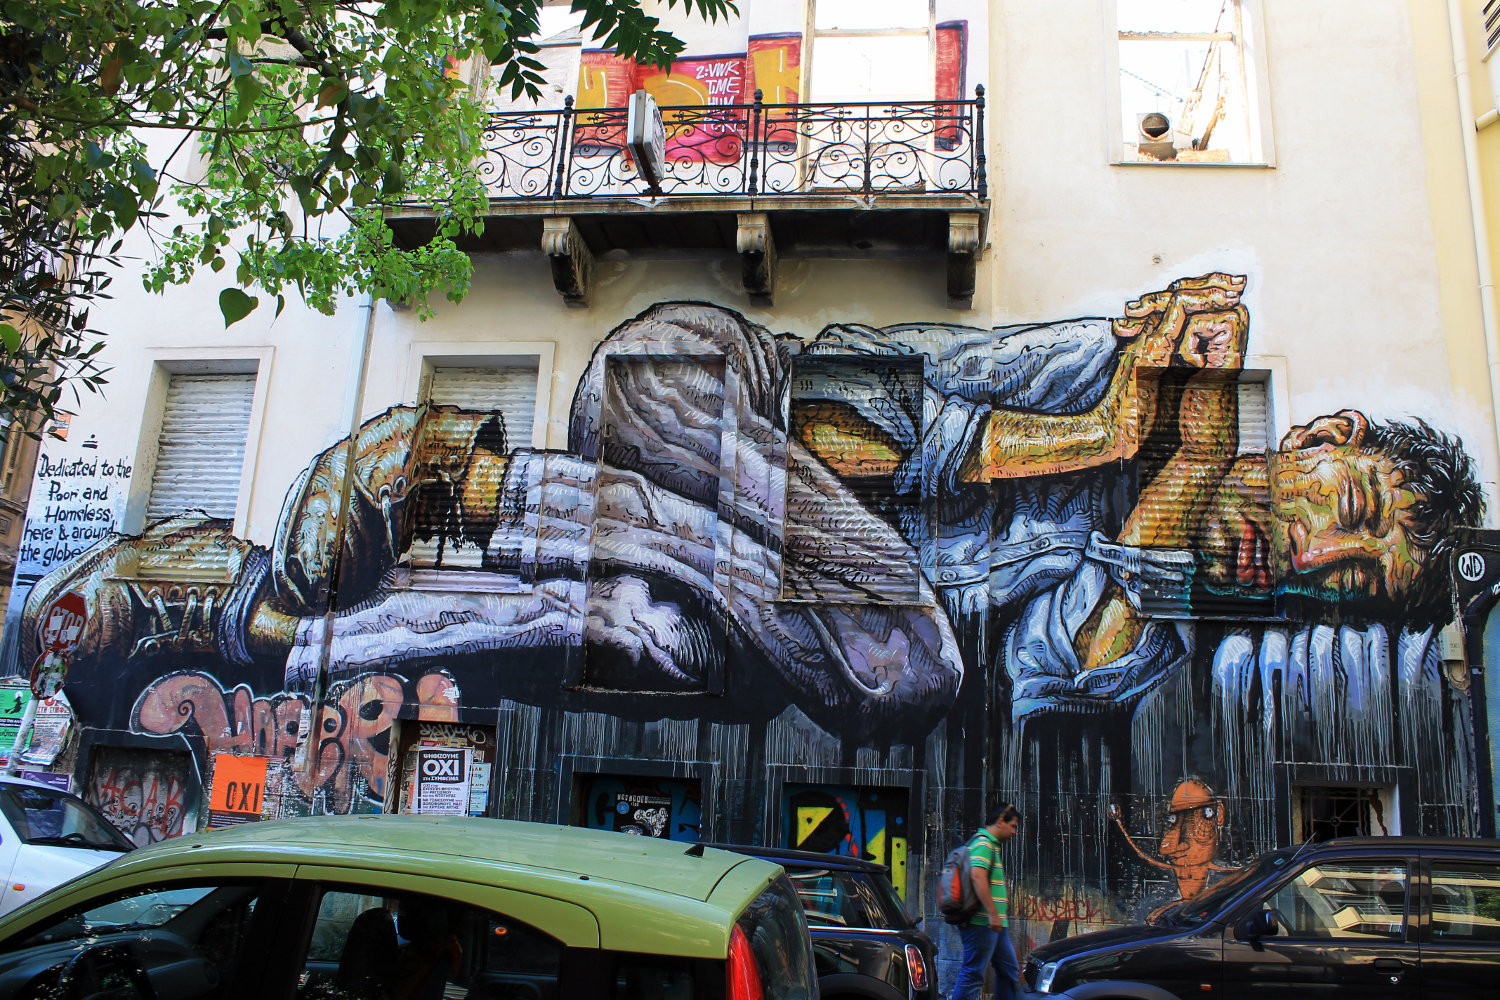 Wild Drawing paints a new mural in Athens "No land for the Poor"